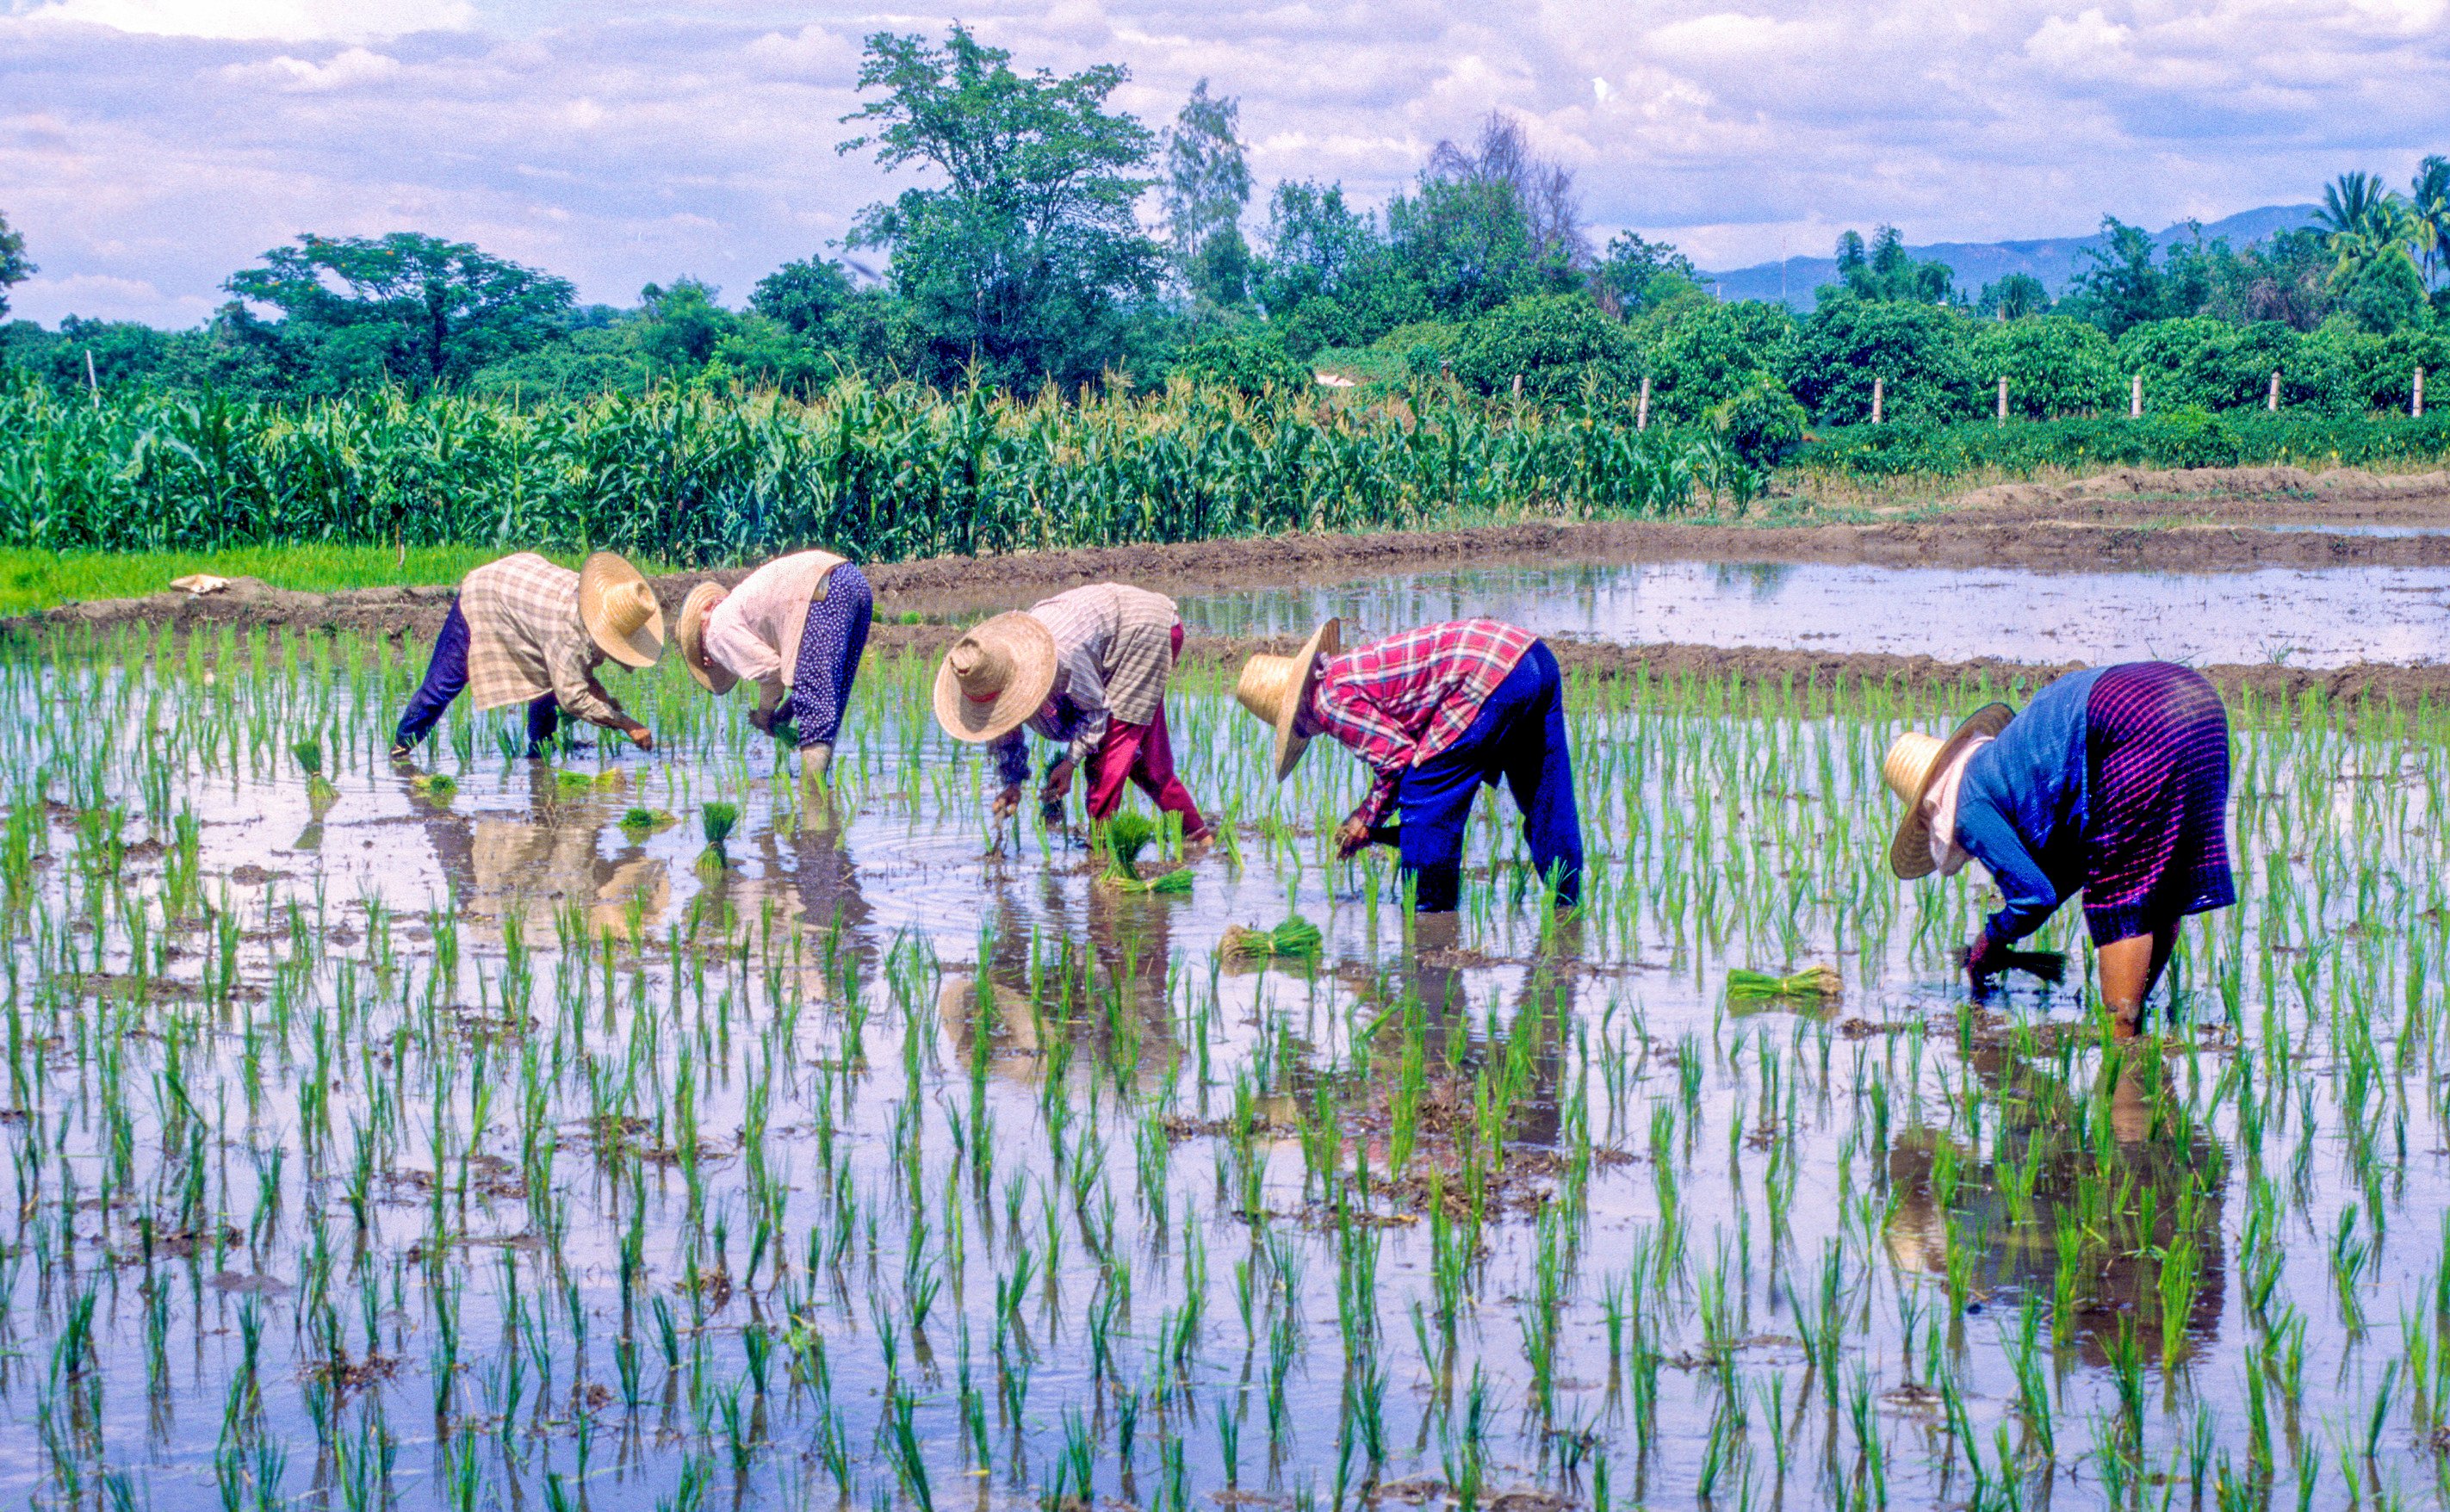 Thai rice farmers transplanting young rice shoots into a flooded paddy. Weather is central to Thai rice farmers’ lives, as they plough, plant and harvest based on the rainfall; and pray to the god of rice for a good harvest. Photo: Ron Emmons